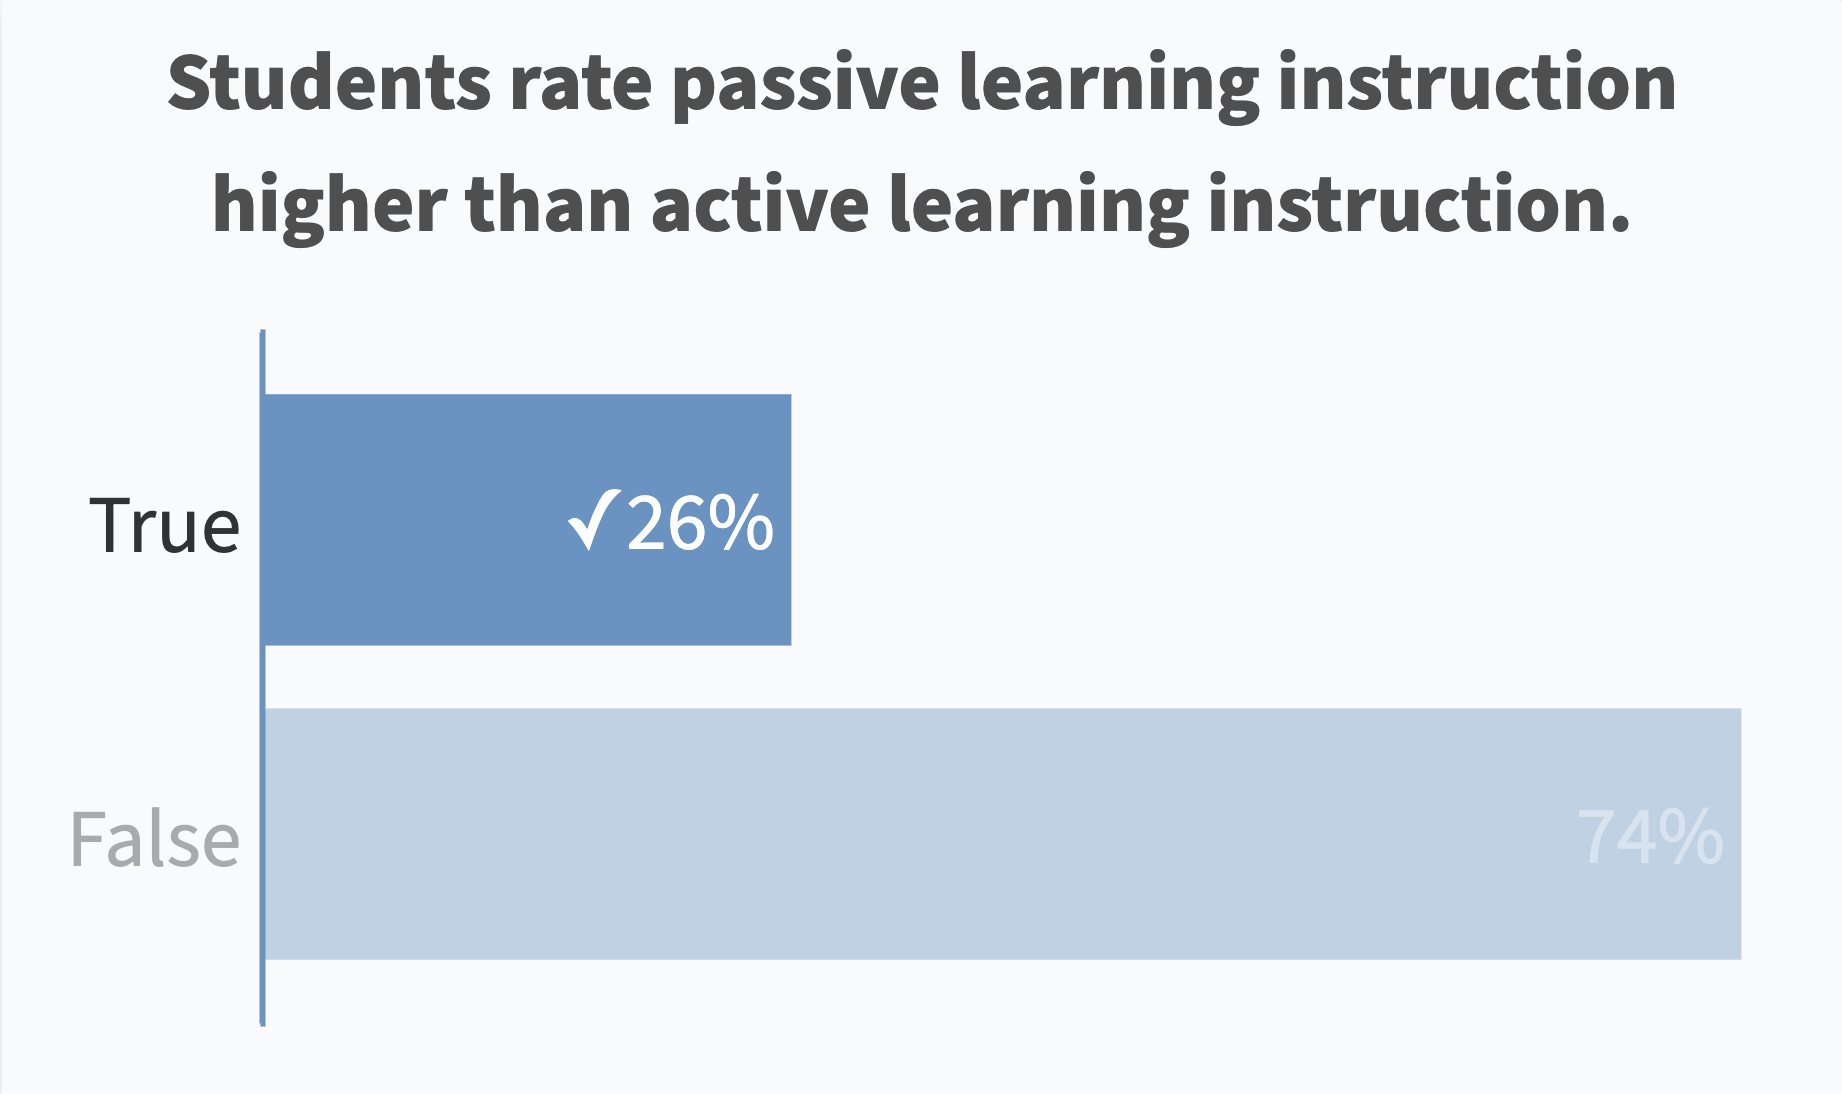 Students rate passive learning instruction higher than active learning instruction.